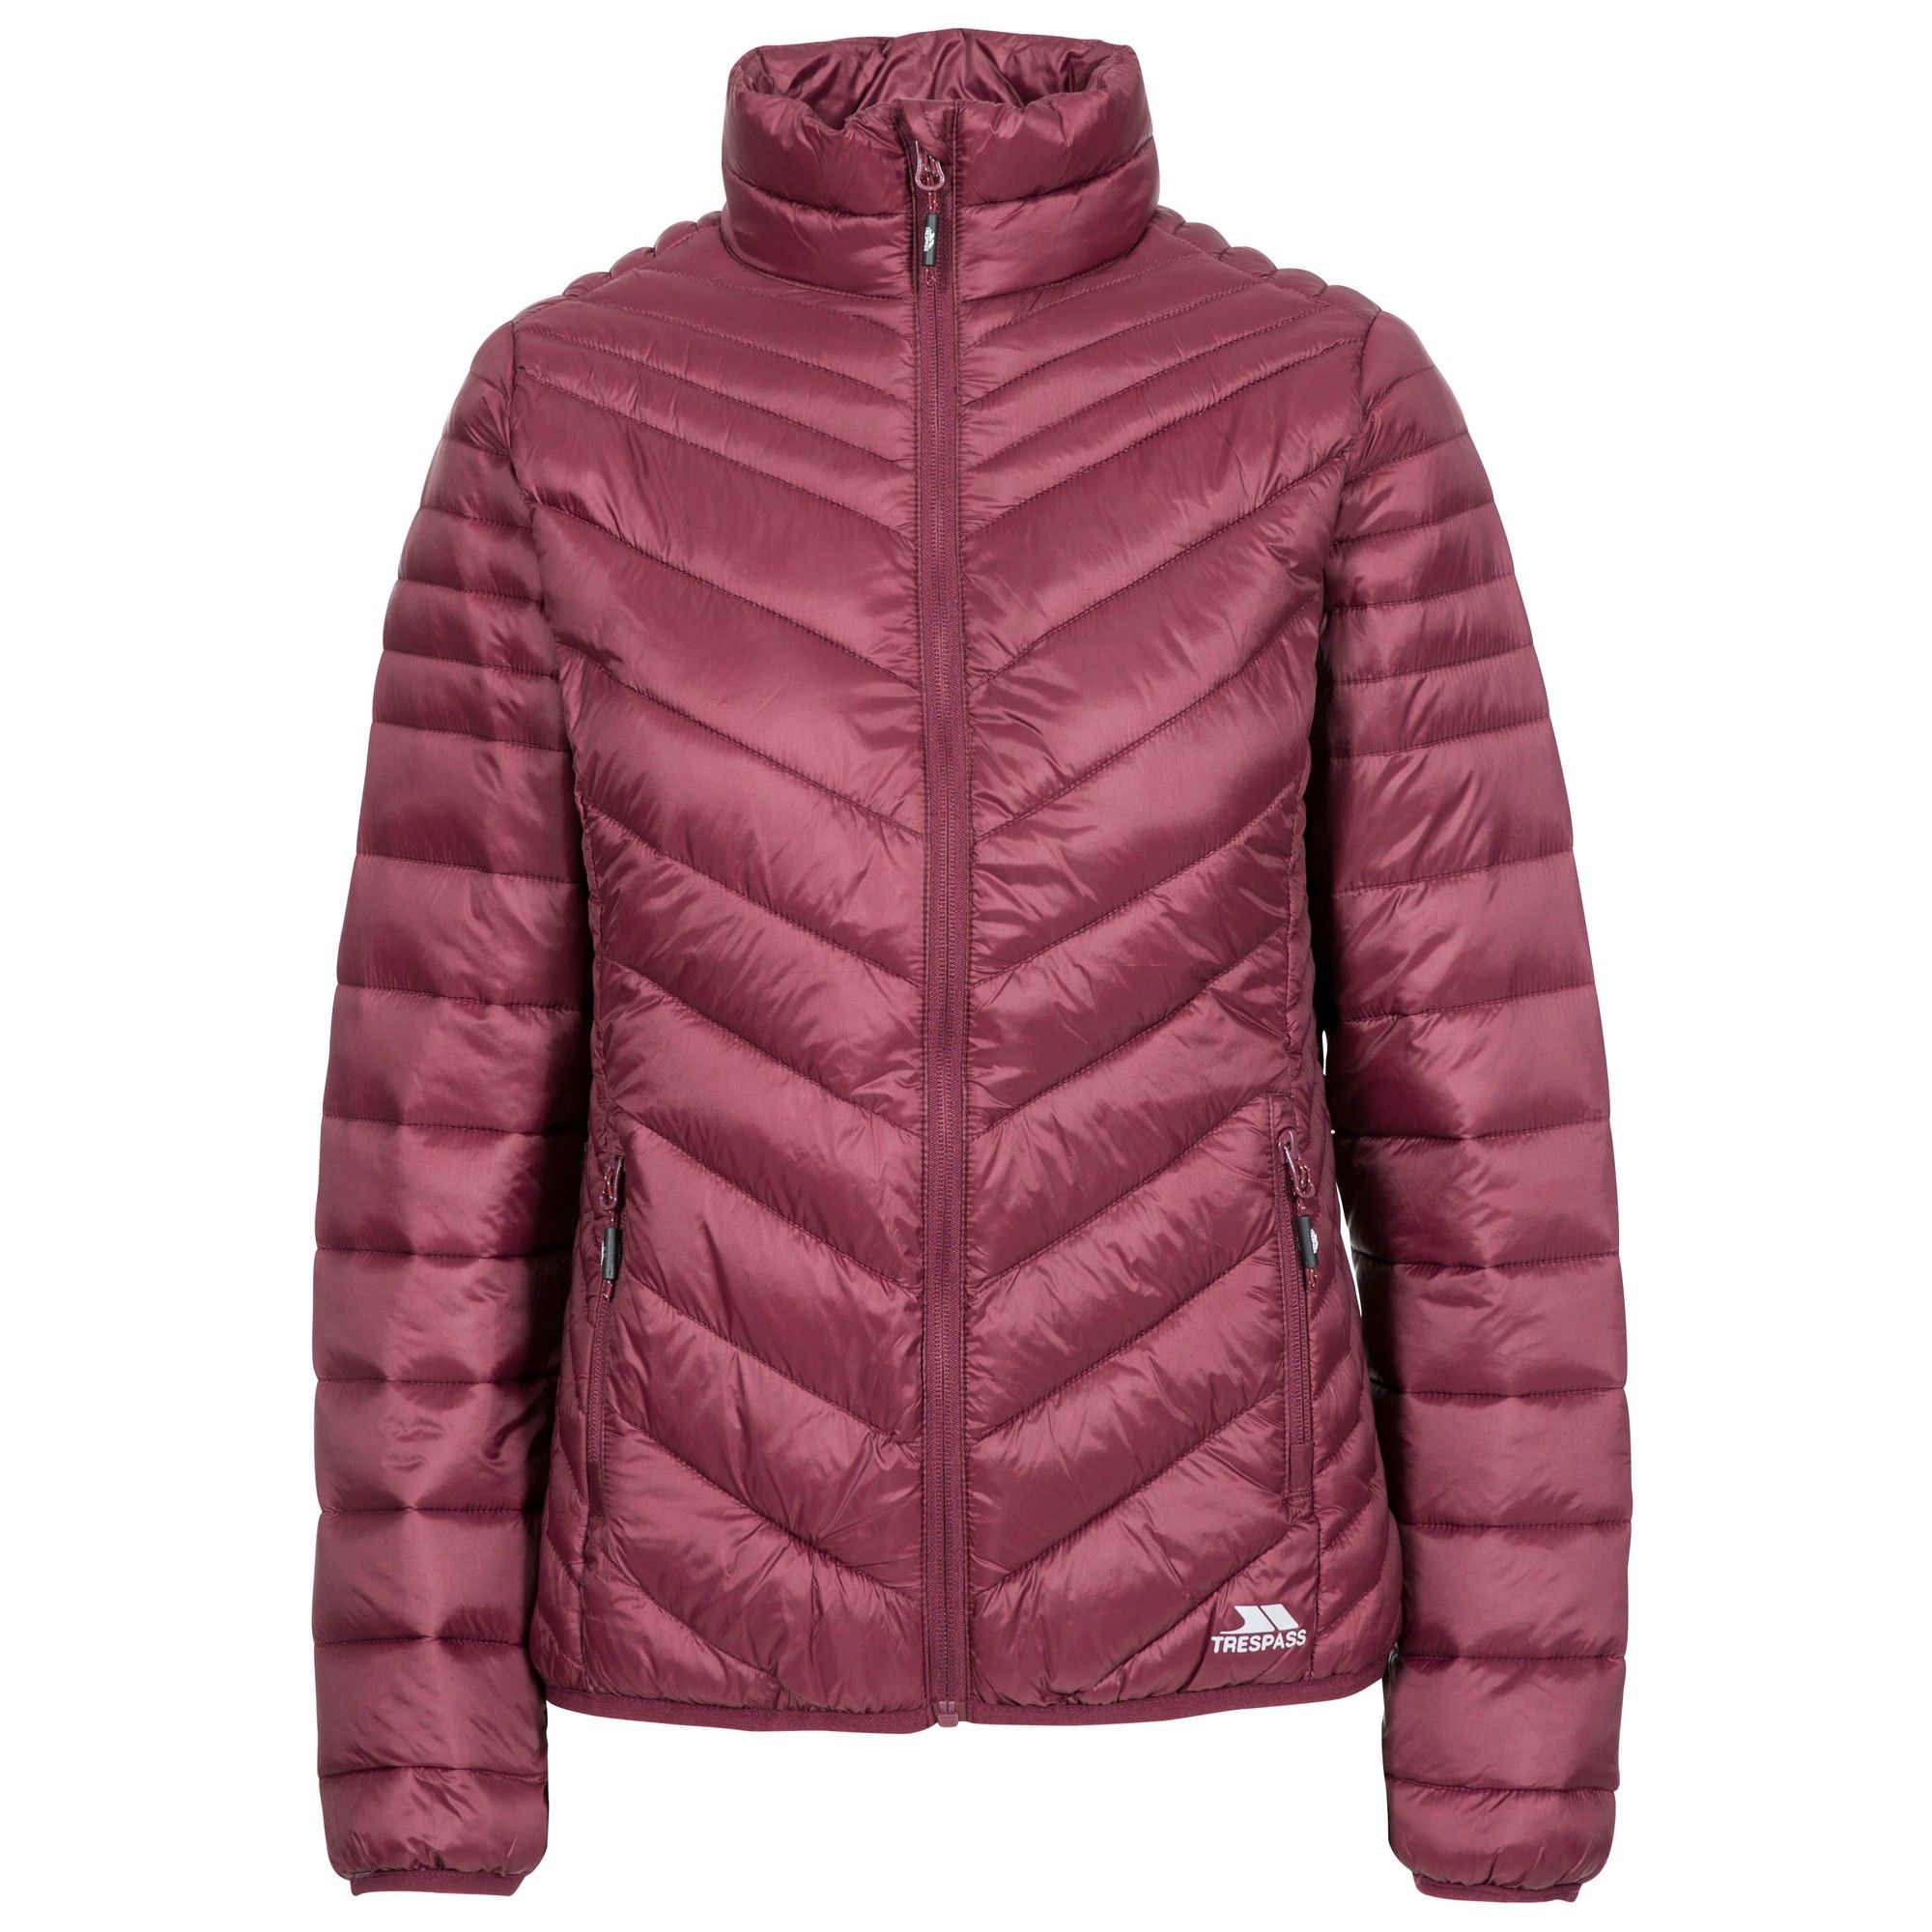 Womens quilted jacket. Down touch filling. 2 zip pockets. Inner storm flap. Elastic binding at cuff and hem. Materials - Shell: 100% polyamide, Lining and Filling: 100% polyester.